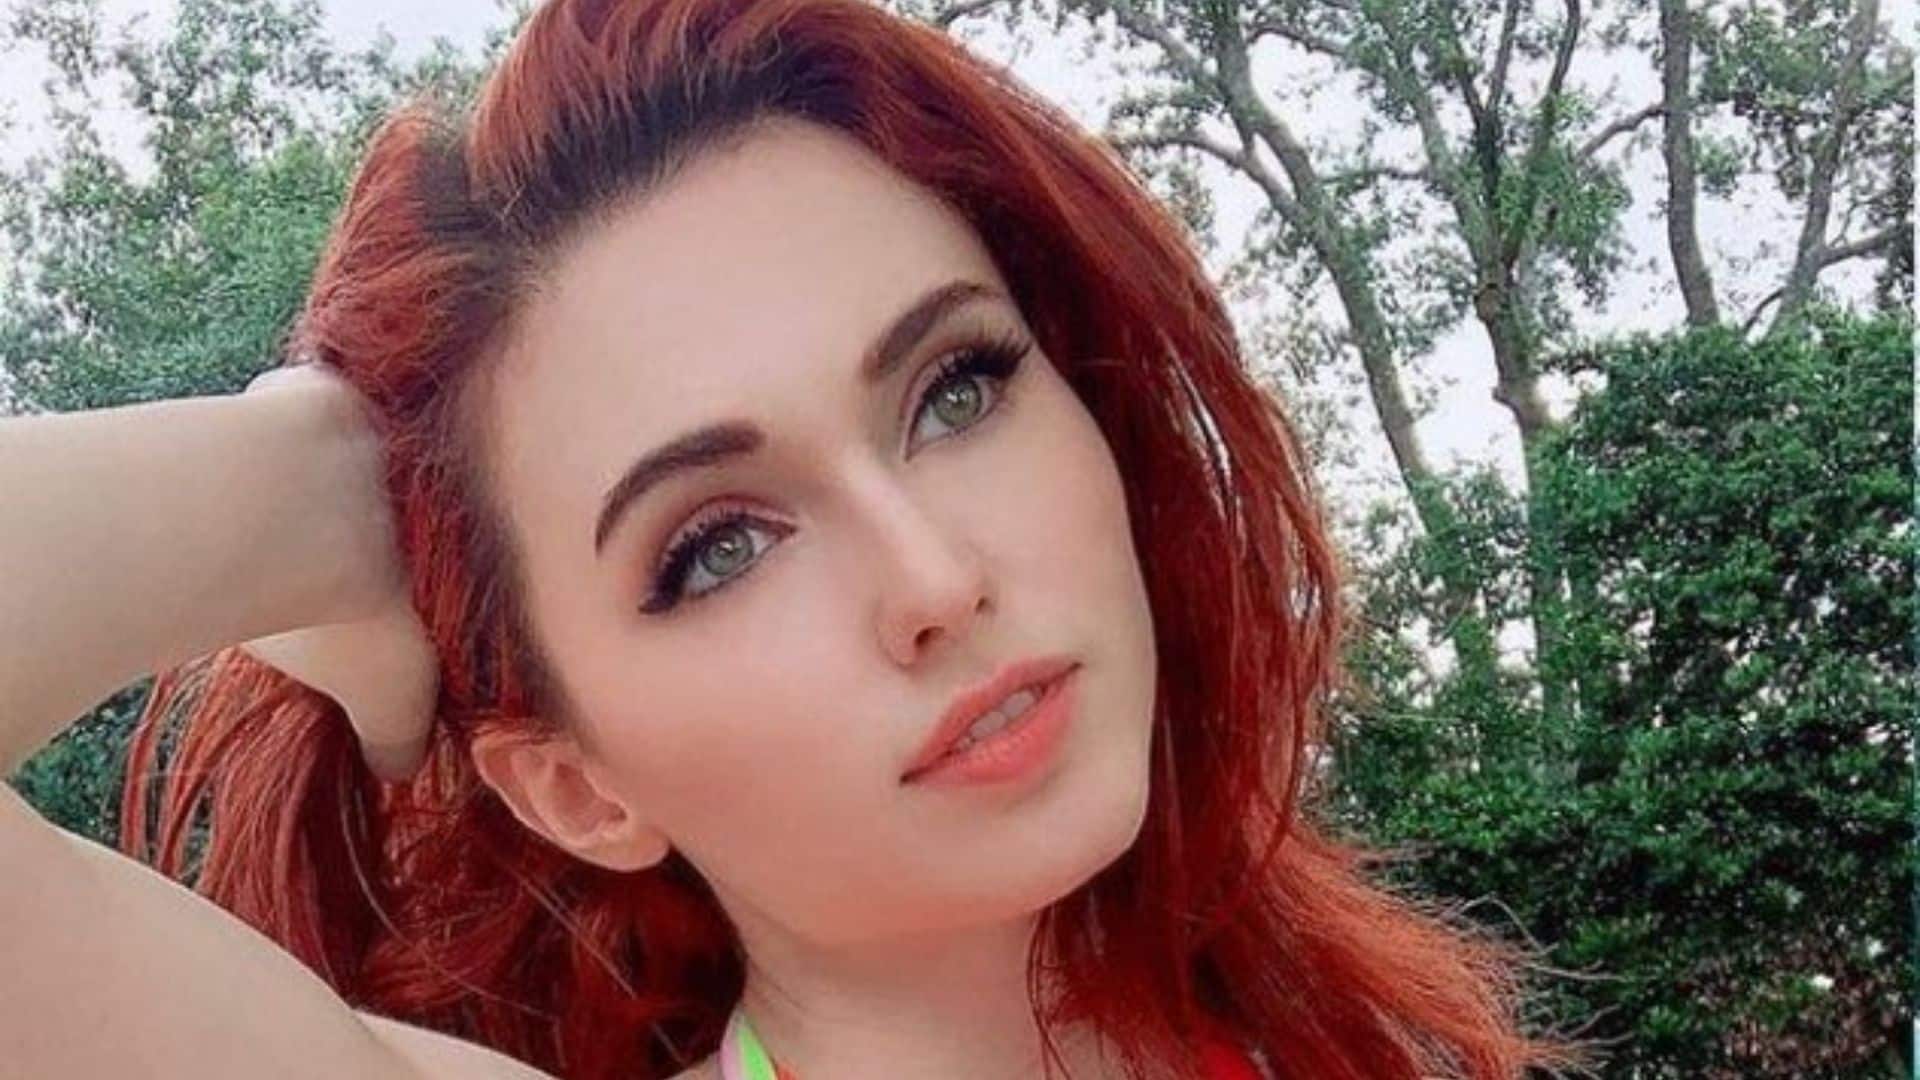 Amouranth posing by a pool on Twitch